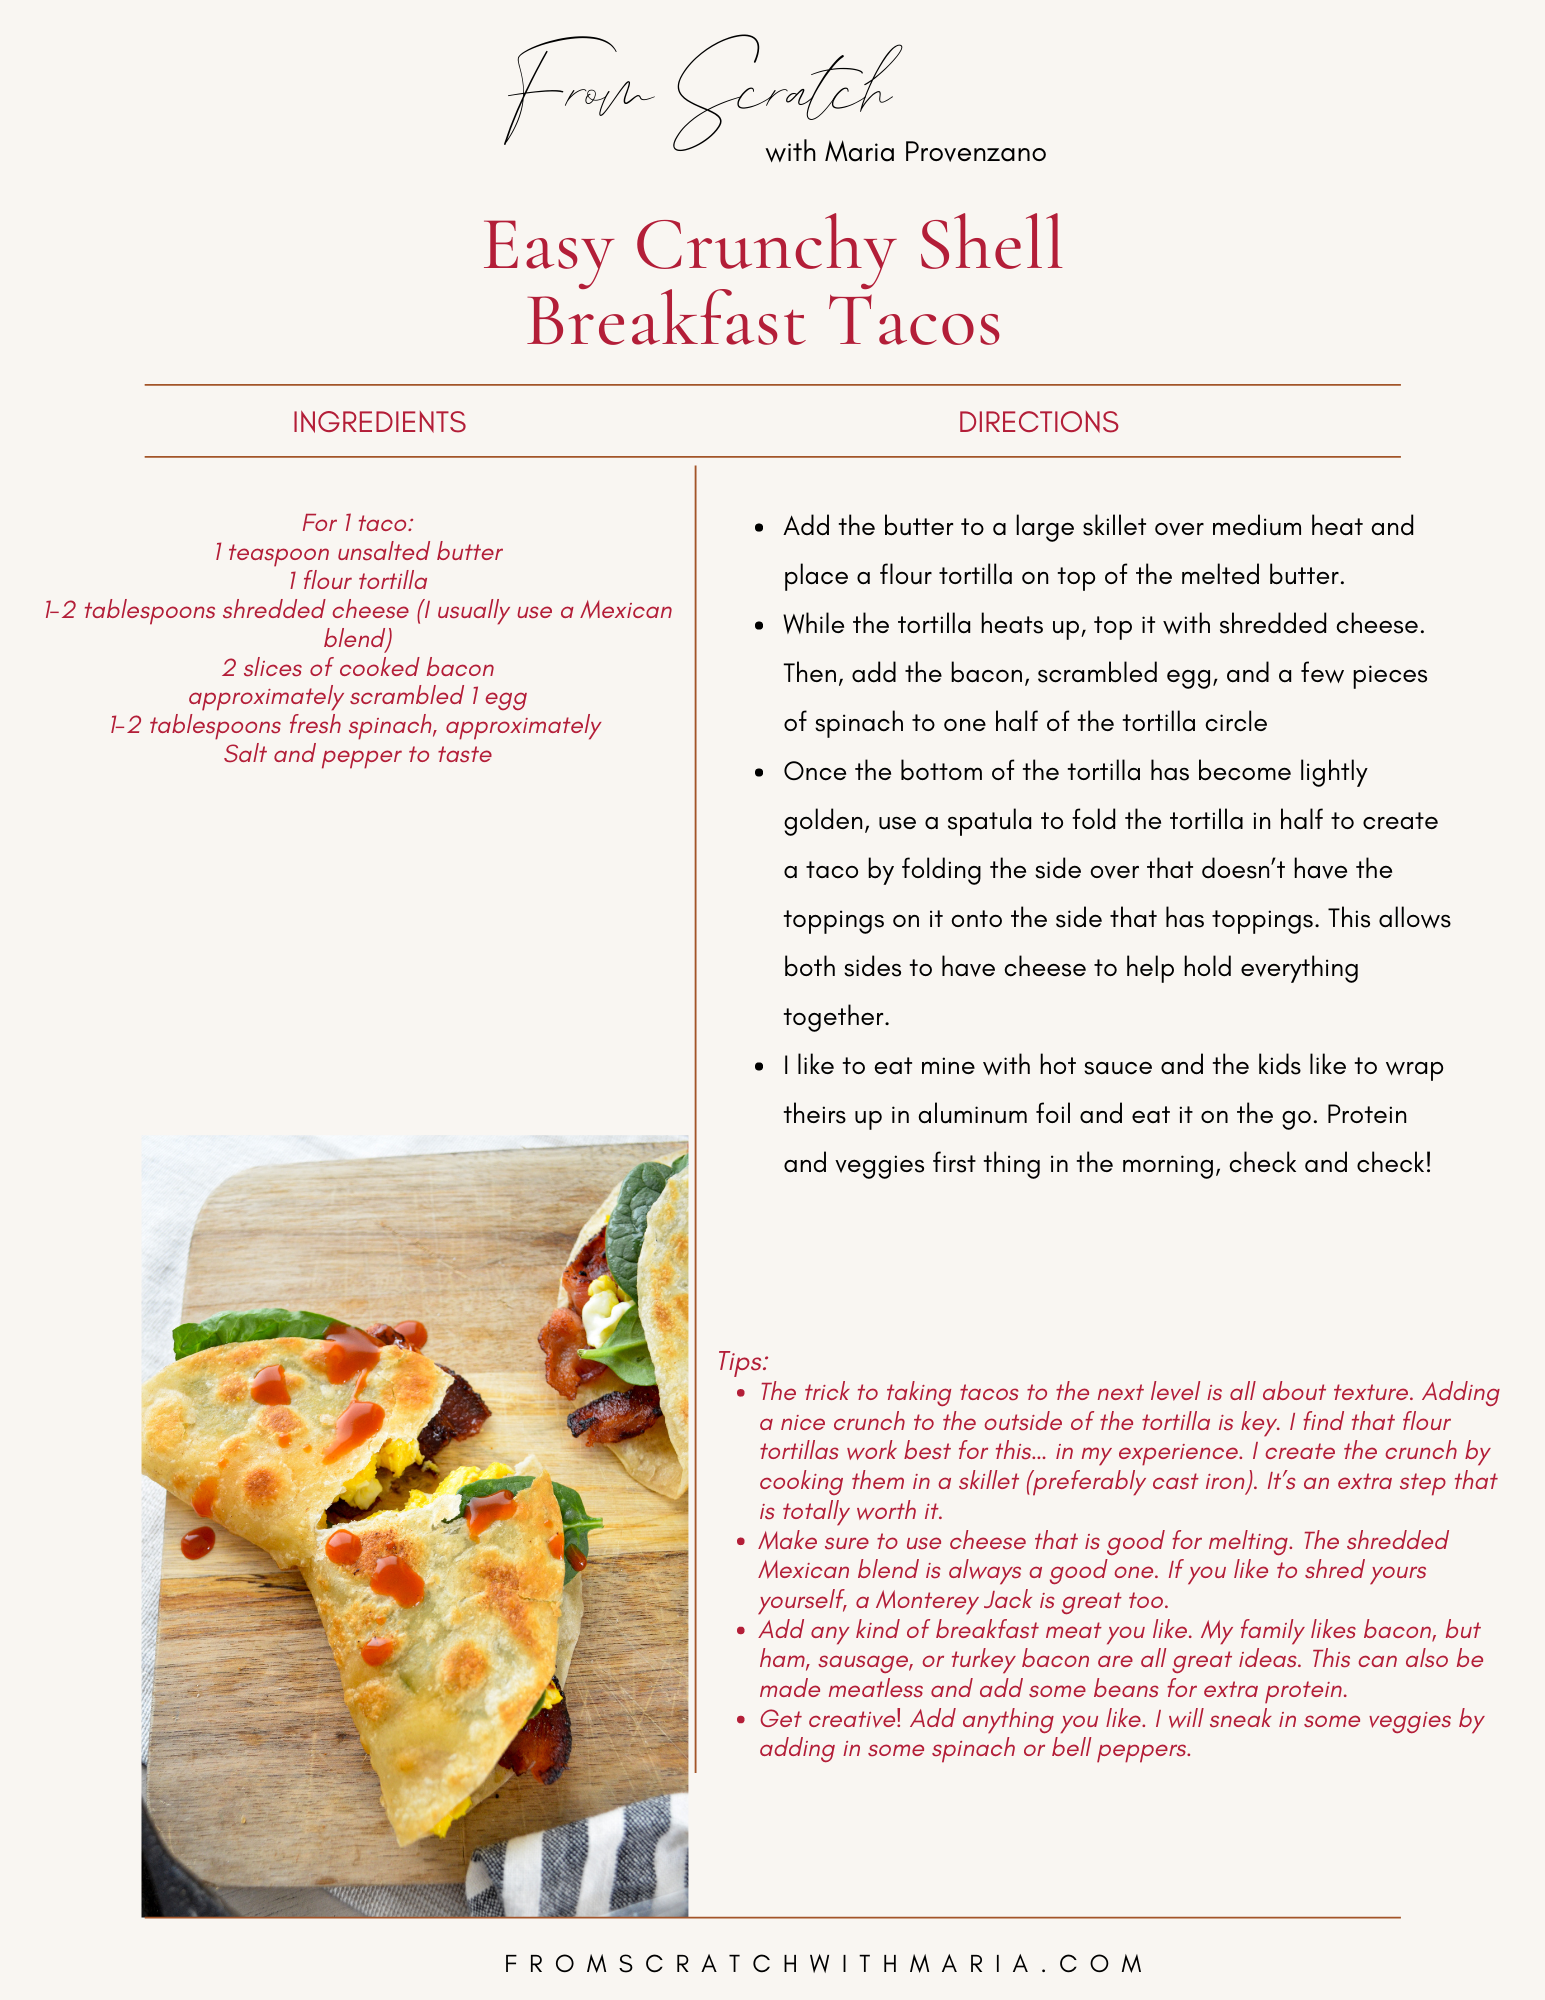 Easy Crunchy Shell Breakfast Tacos — From Scratch with Maria Provenzano